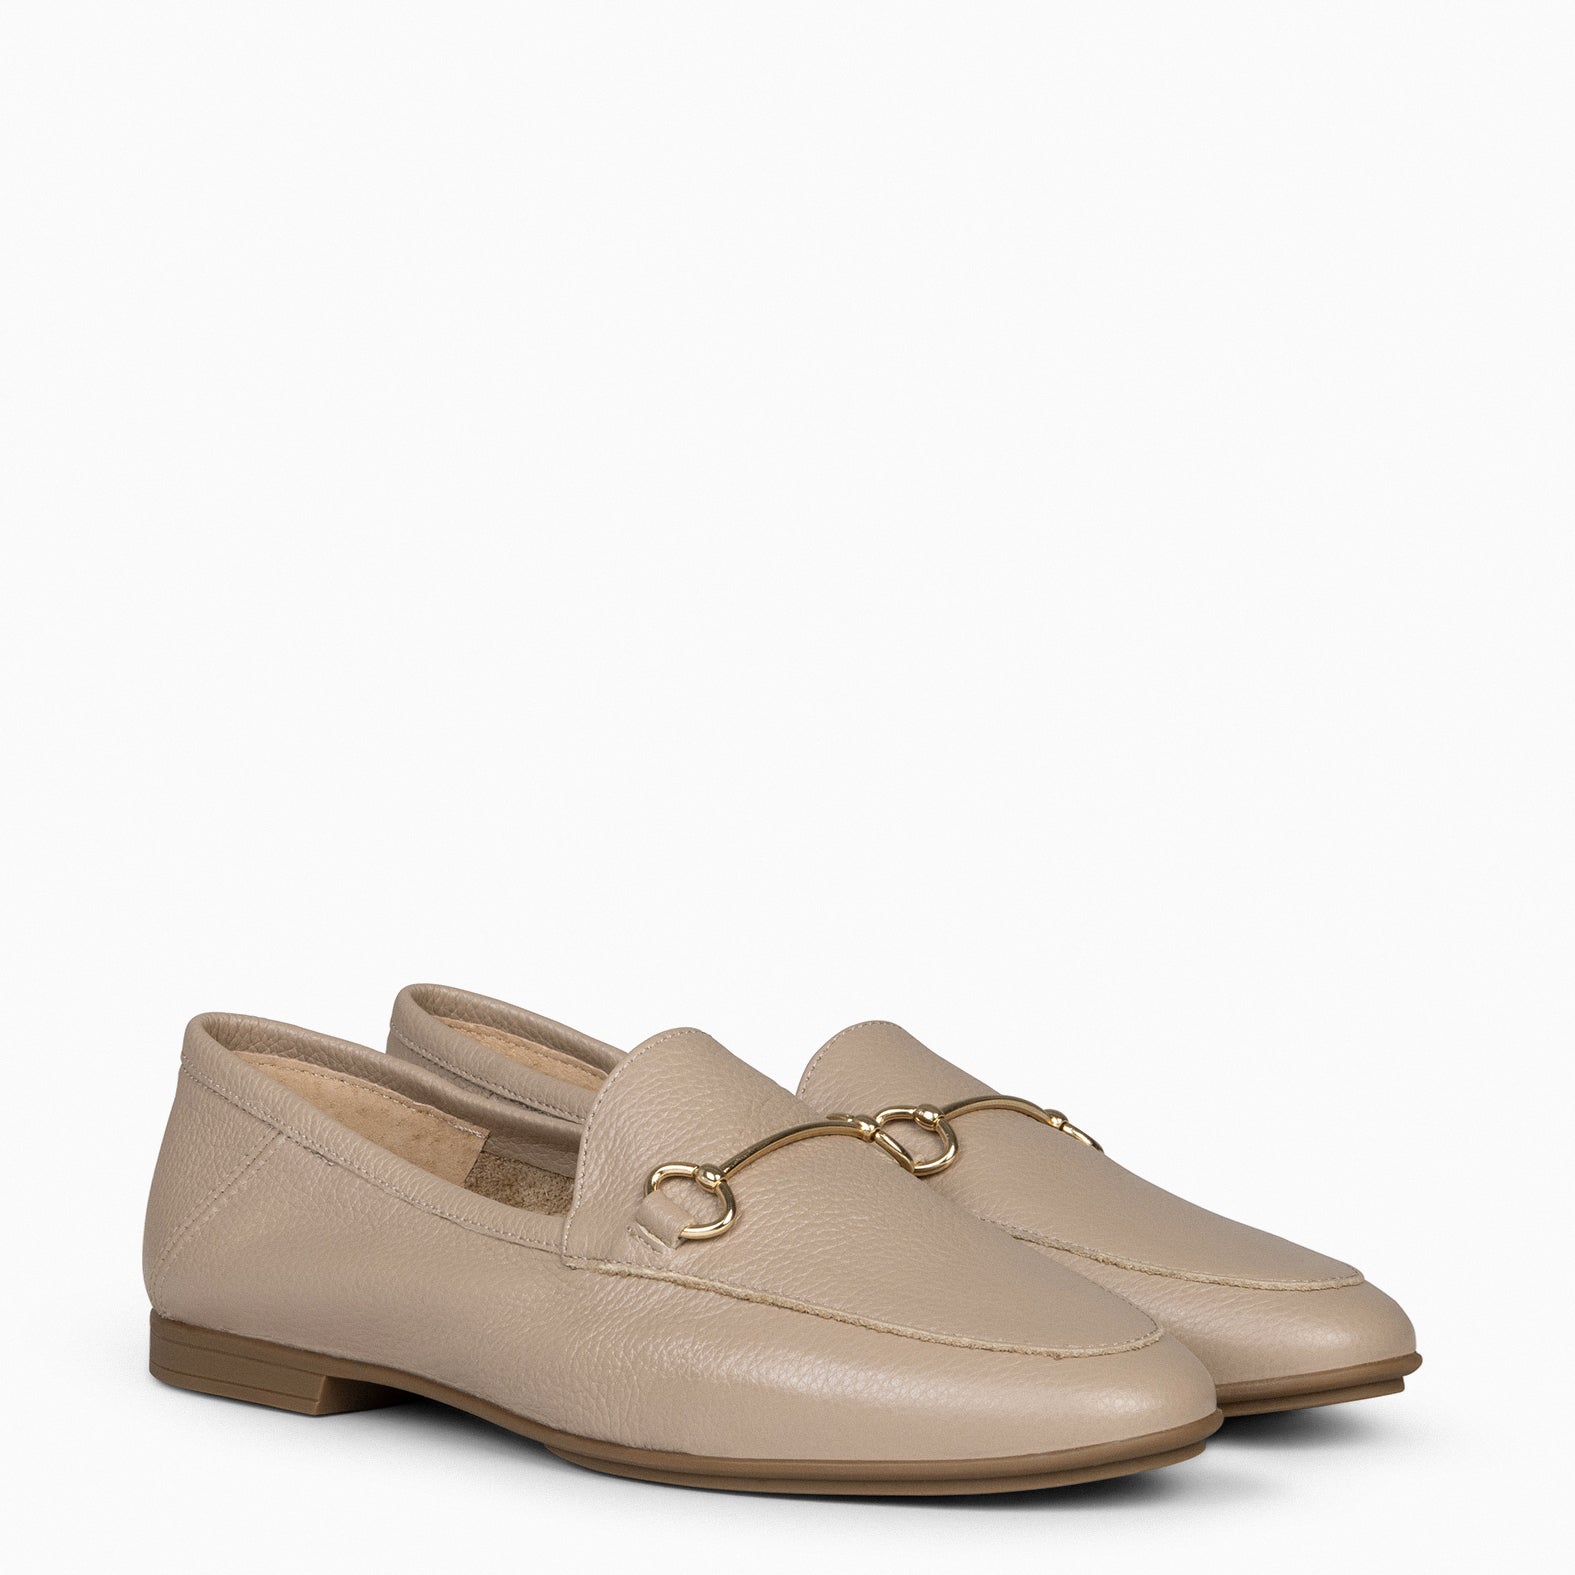 STYLE – TAUPE moccasins with horsebit